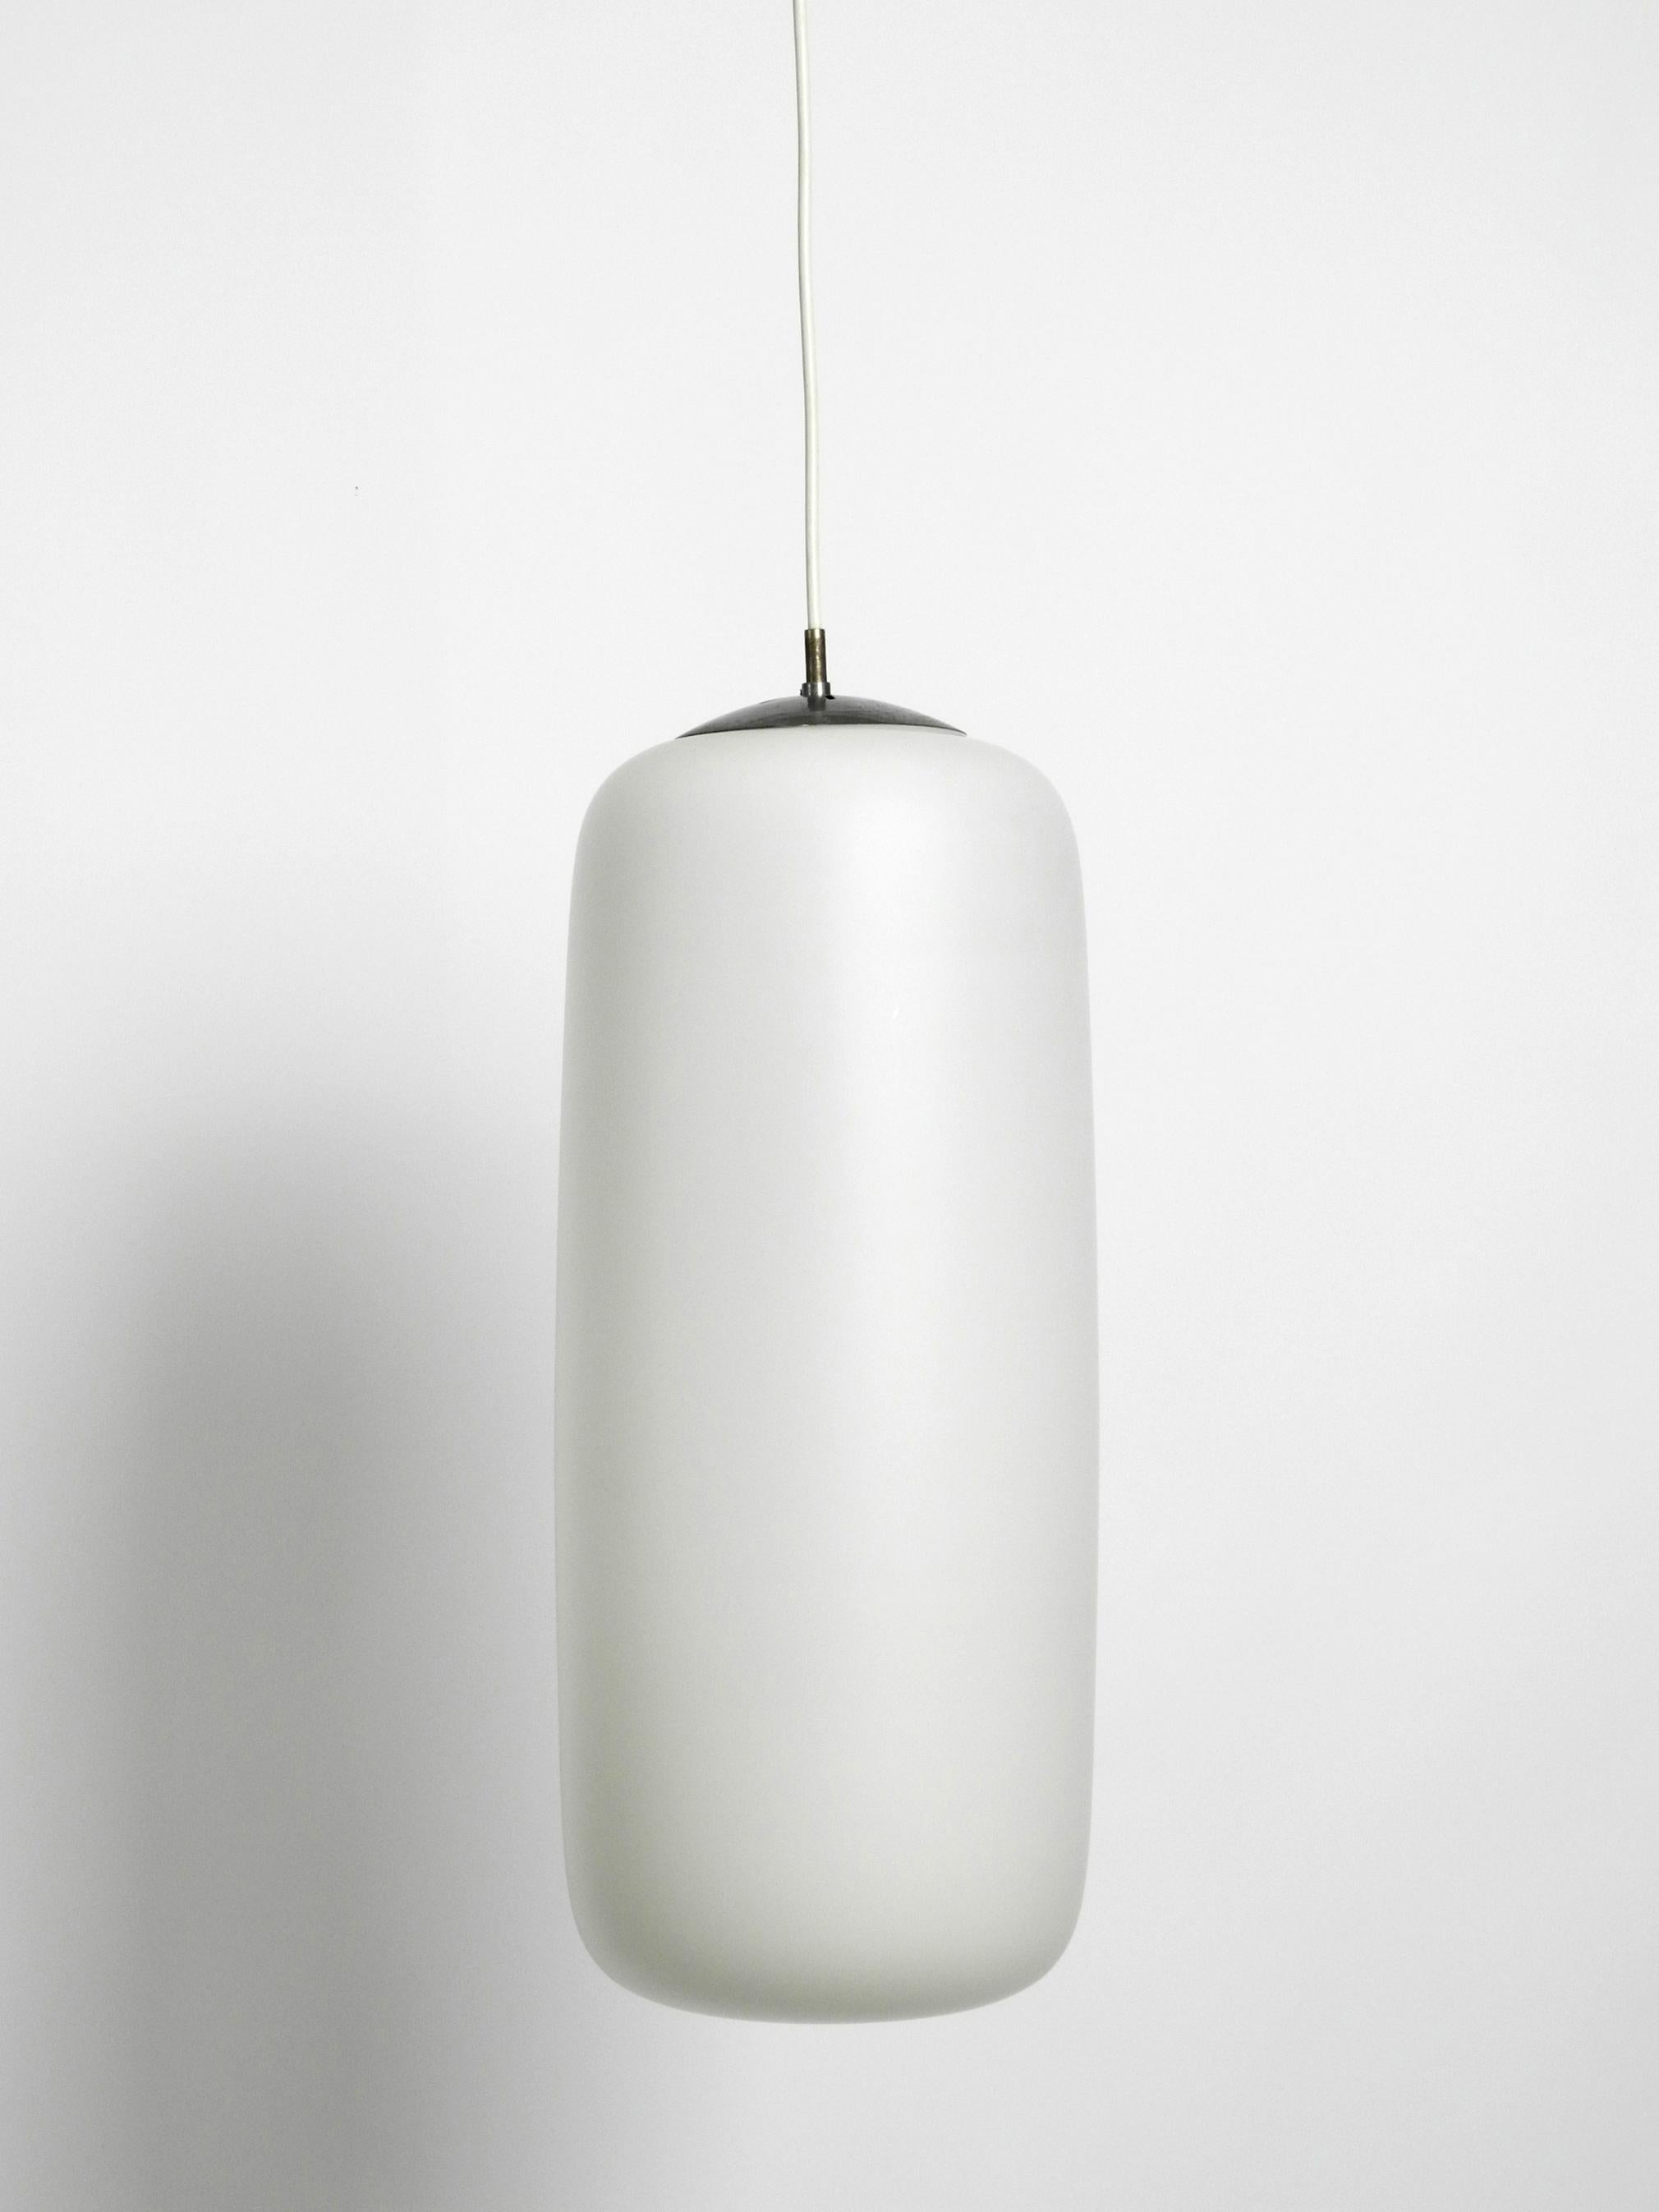 German Extra Large Mid-Century Modernist Wagenfeld Glass Pendant Lamp 3 Lamps Available For Sale